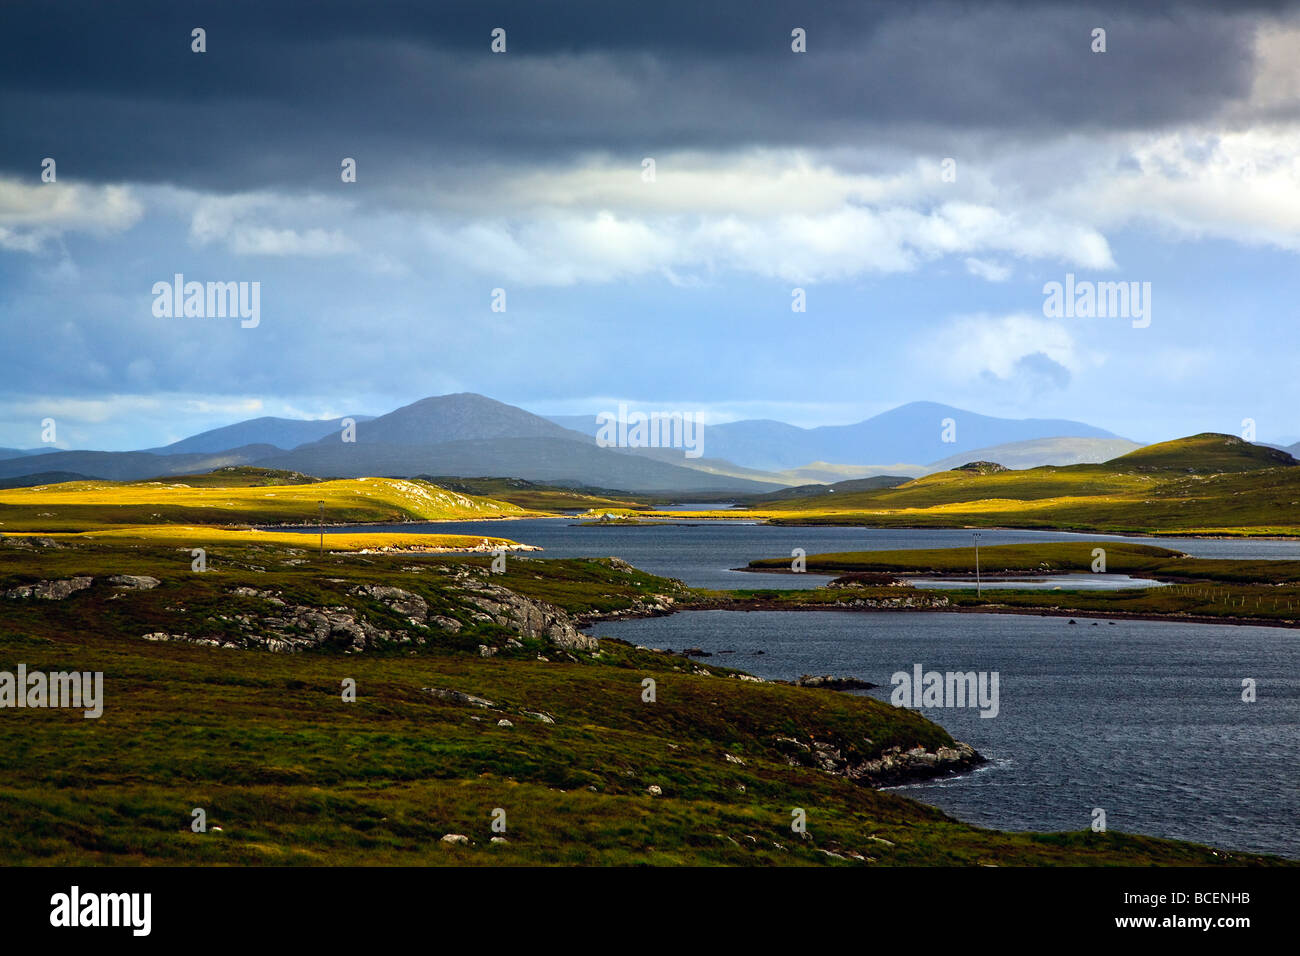 Loch Faoghail on Lewis looking towards the mountains of Harris, Outer Hebrides, Western Isles, Scotland UK 2009 Stock Photo